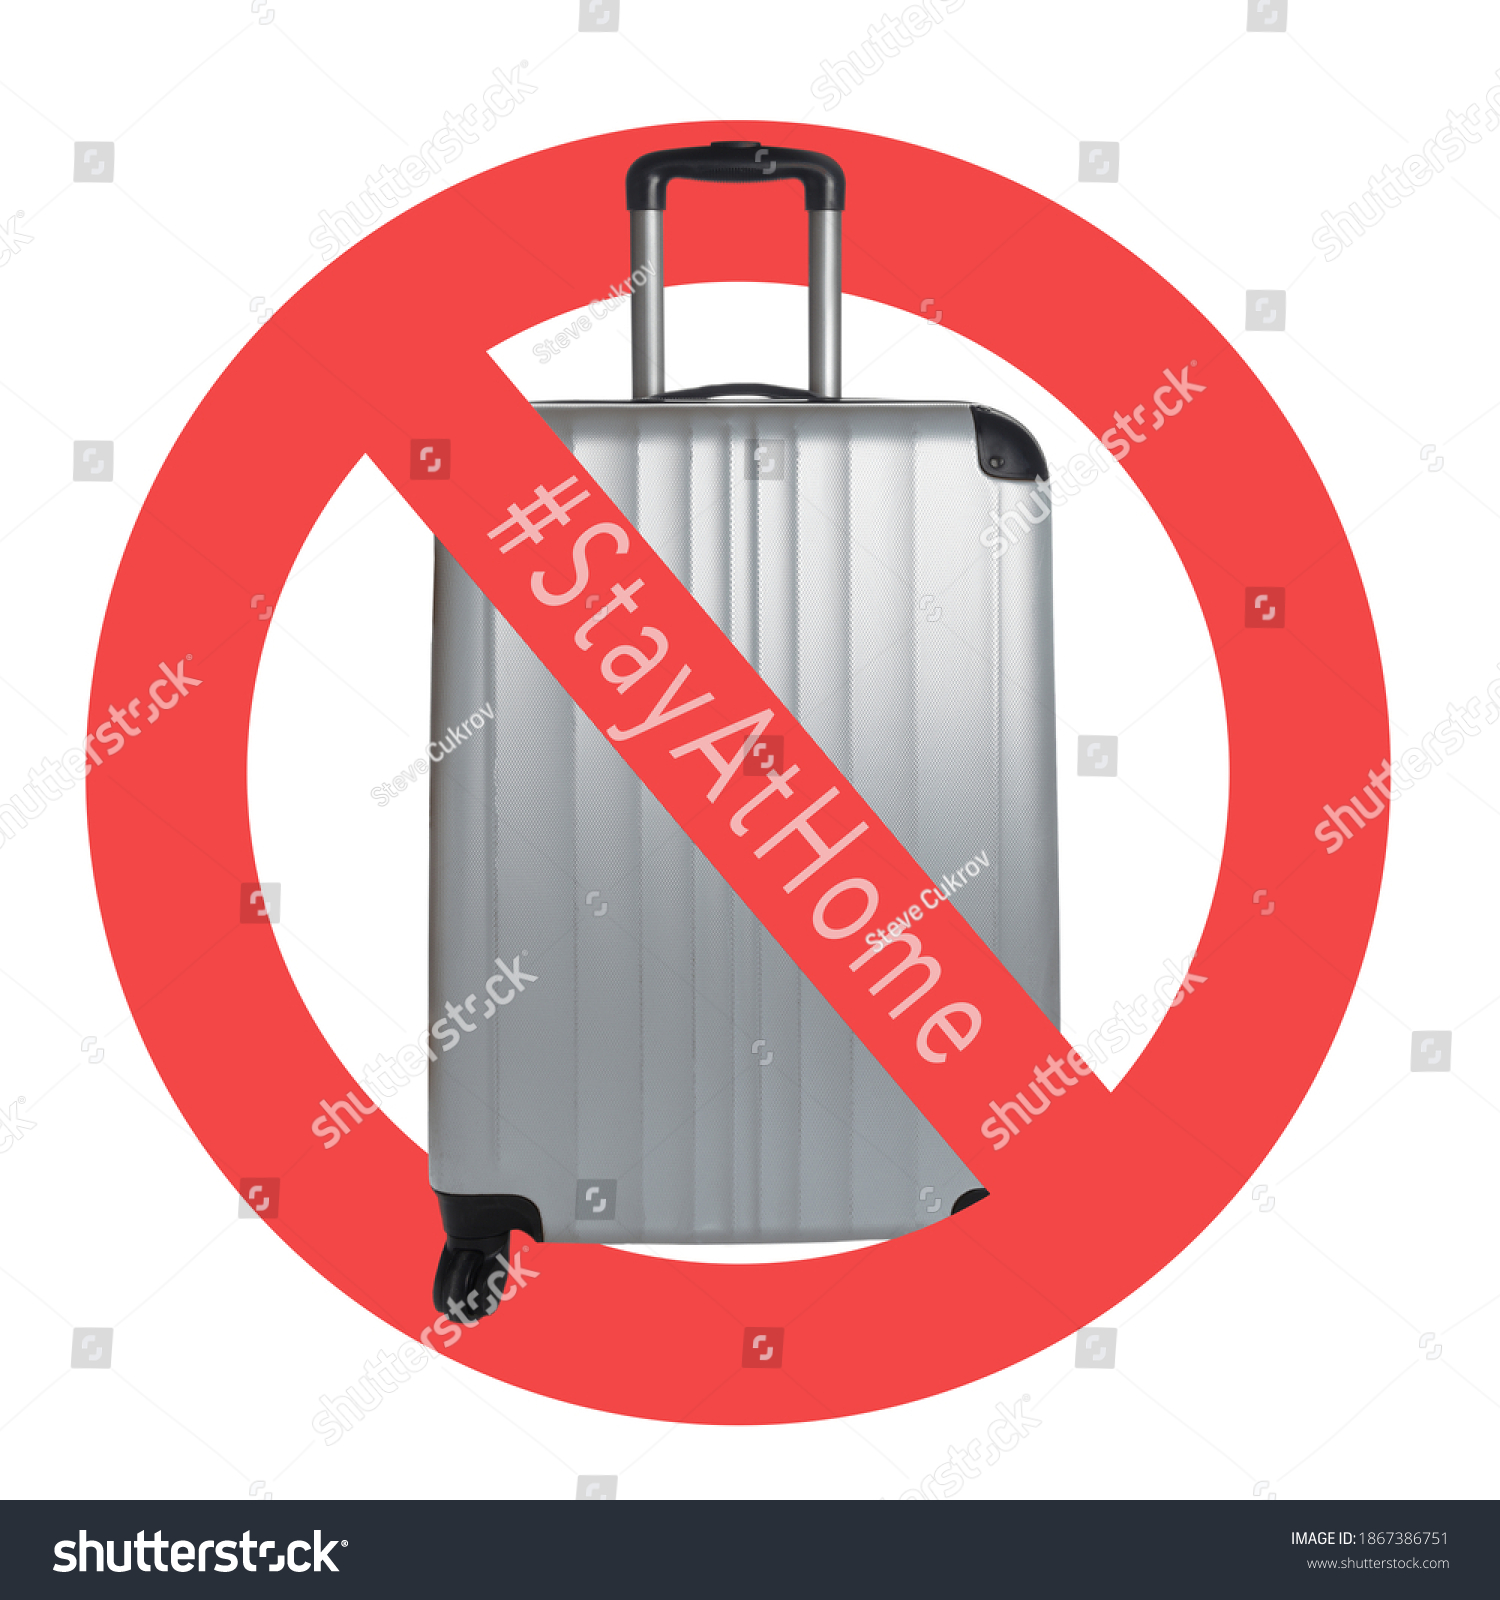 Silver Suitcase on a white background with international no symbol and #stayathome. Cancelled trip tourism restrictions concept during COVID-19 pandemic.  #1867386751